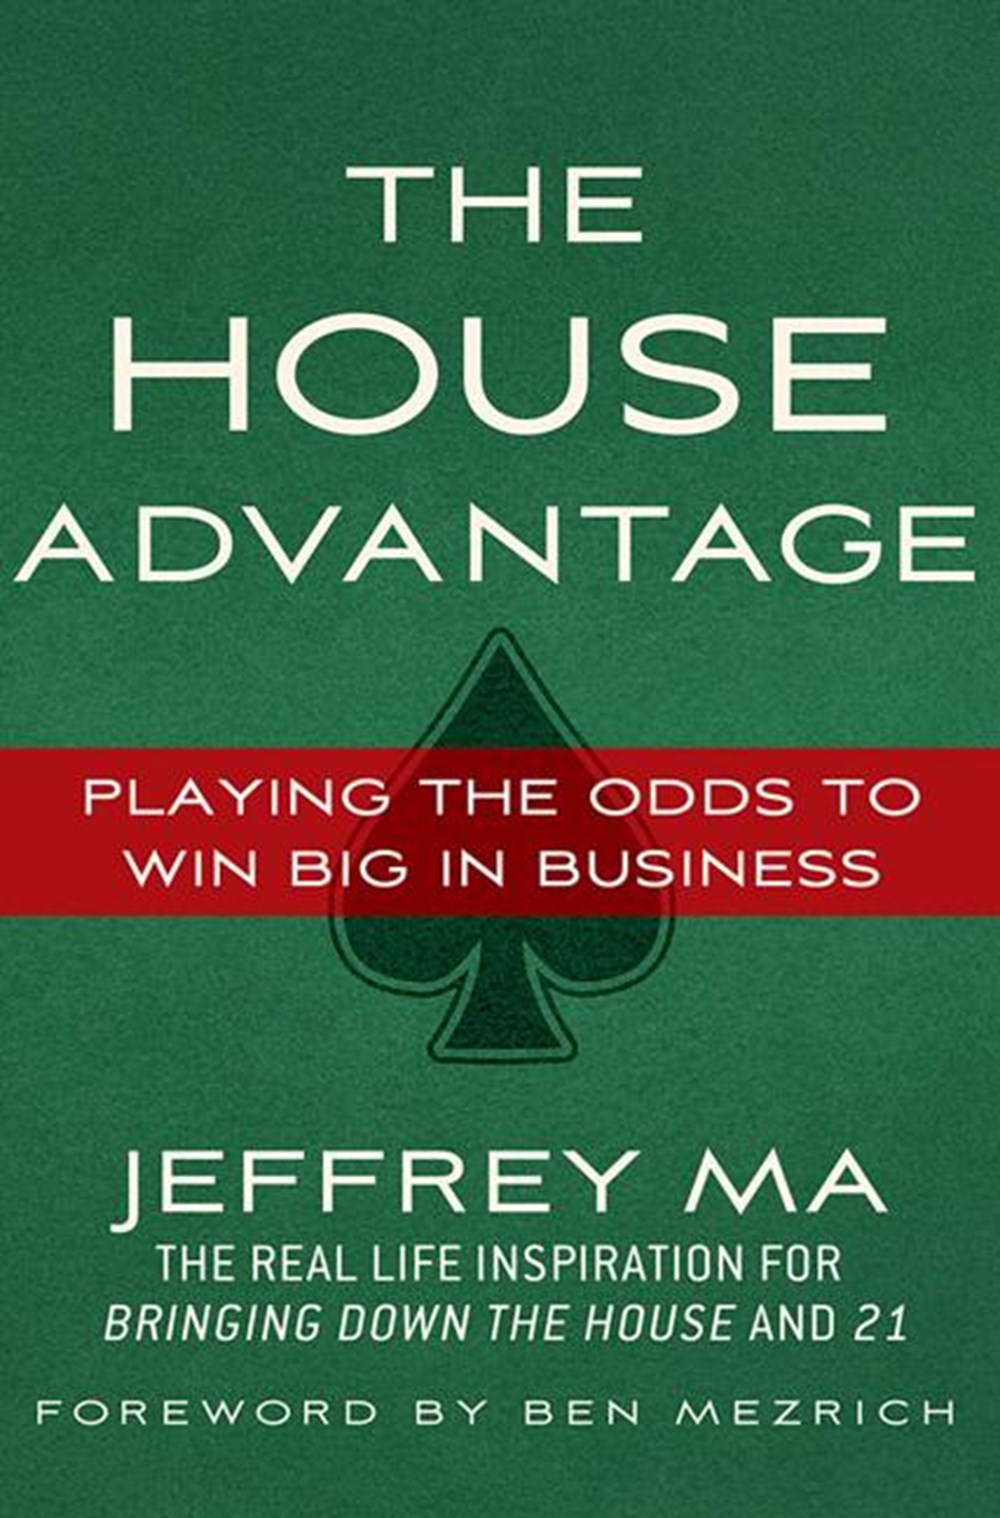 House Advantage: Playing the Odds to Win Big in Business